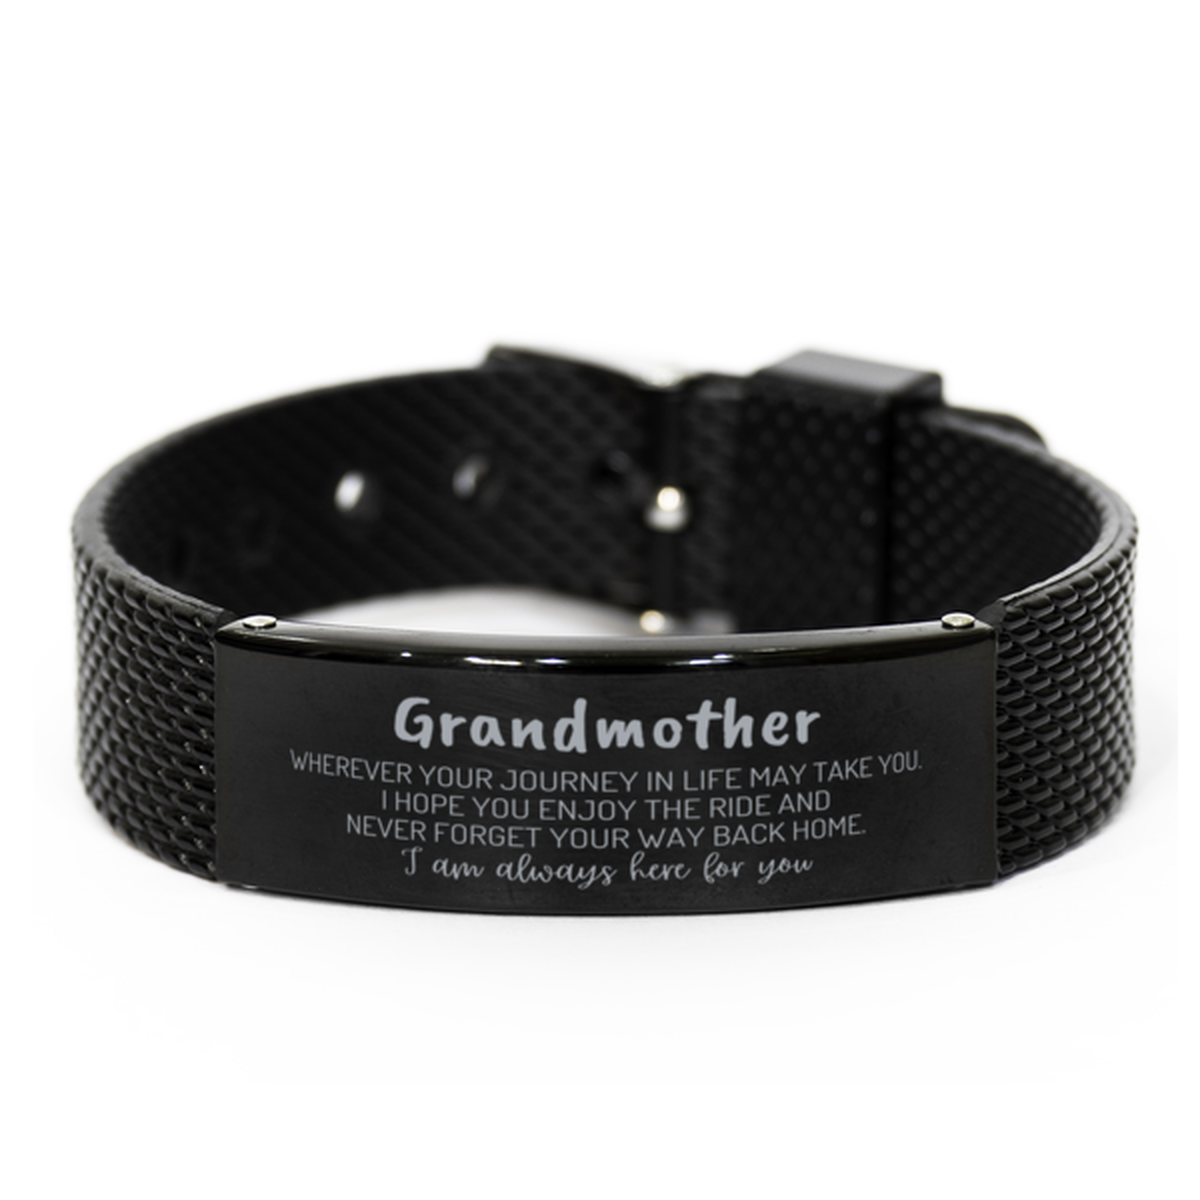 Grandmother wherever your journey in life may take you, I am always here for you Grandmother Black Shark Mesh Bracelet, Awesome Christmas Gifts For Grandmother, Grandmother Birthday Gifts for Men Women Family Loved One